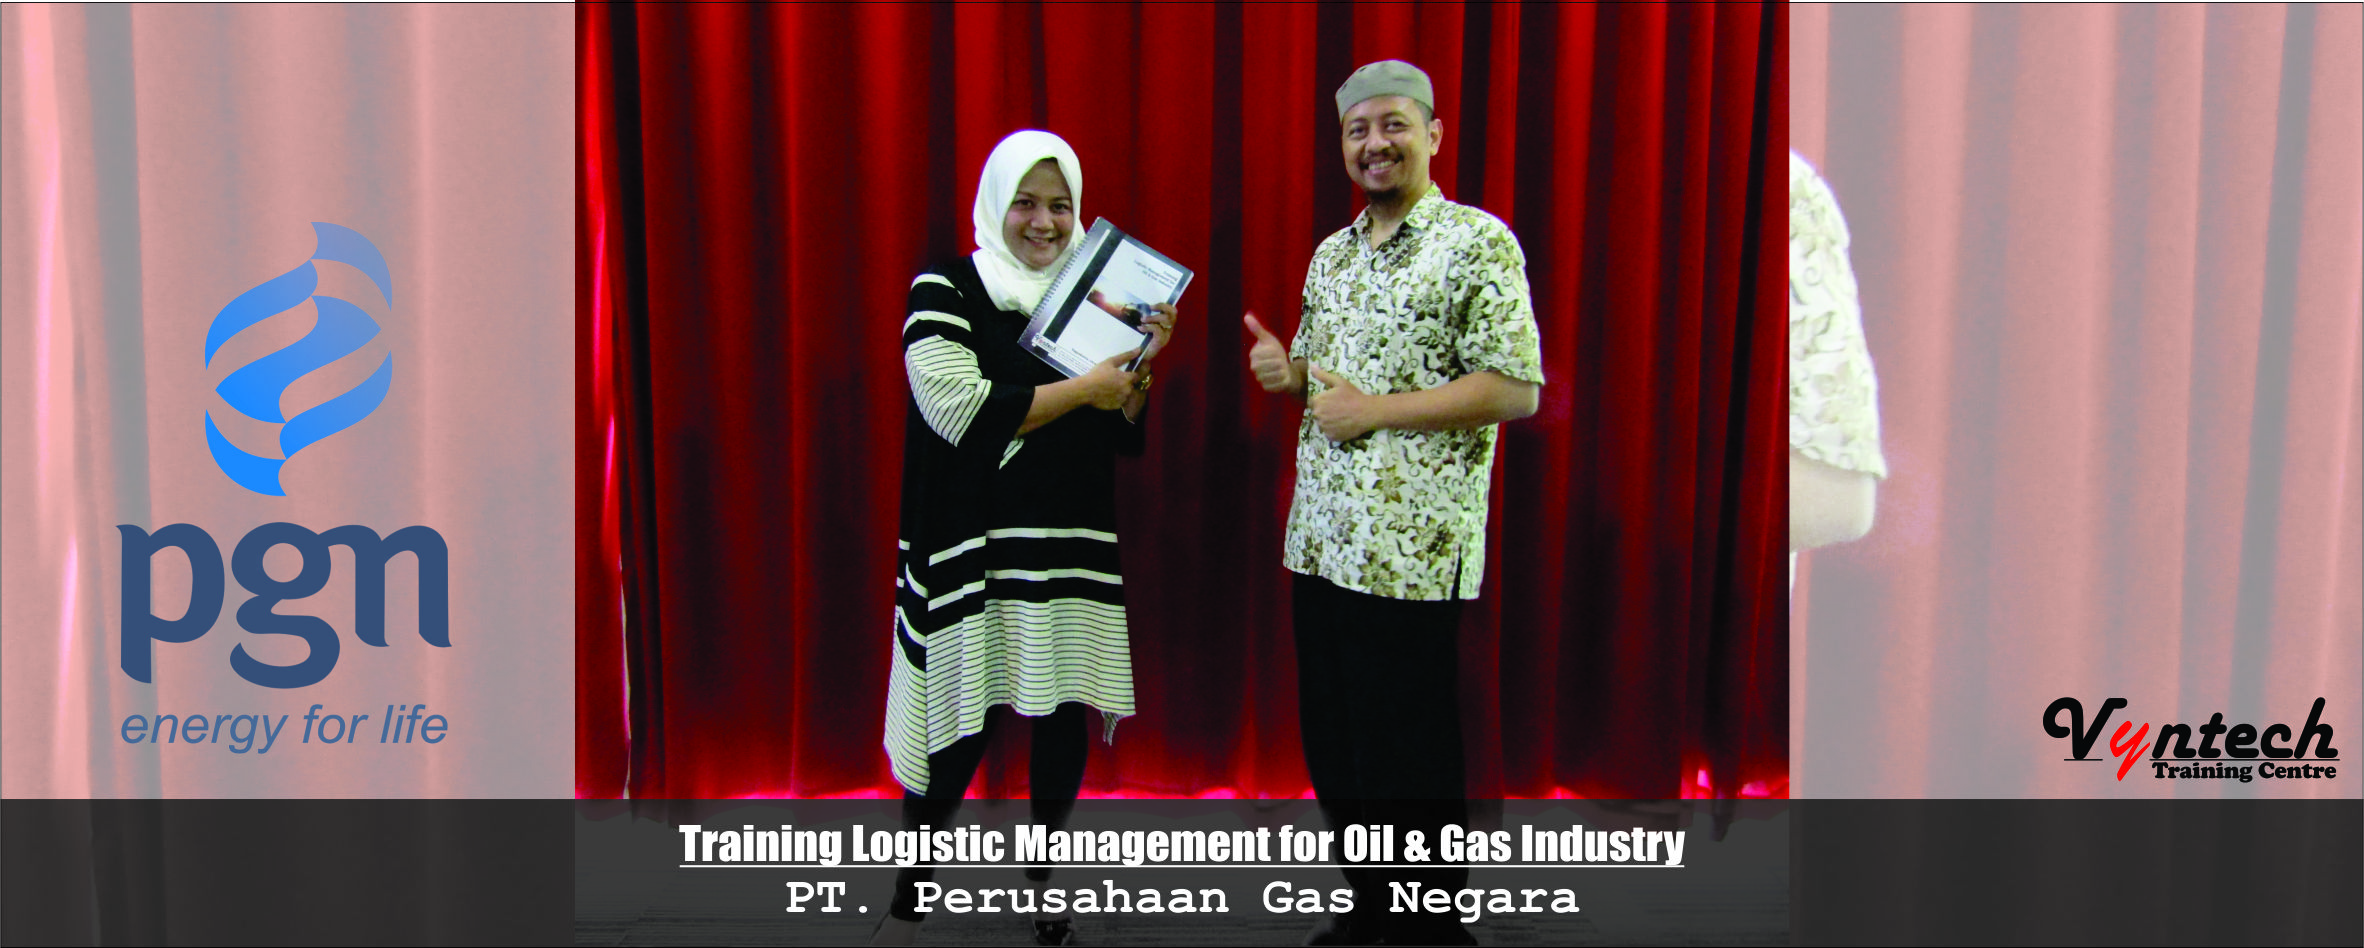 20171018 Training Logistic Management for Oil & Gas Industry - PT. Perusahaan Gas Negara PGN